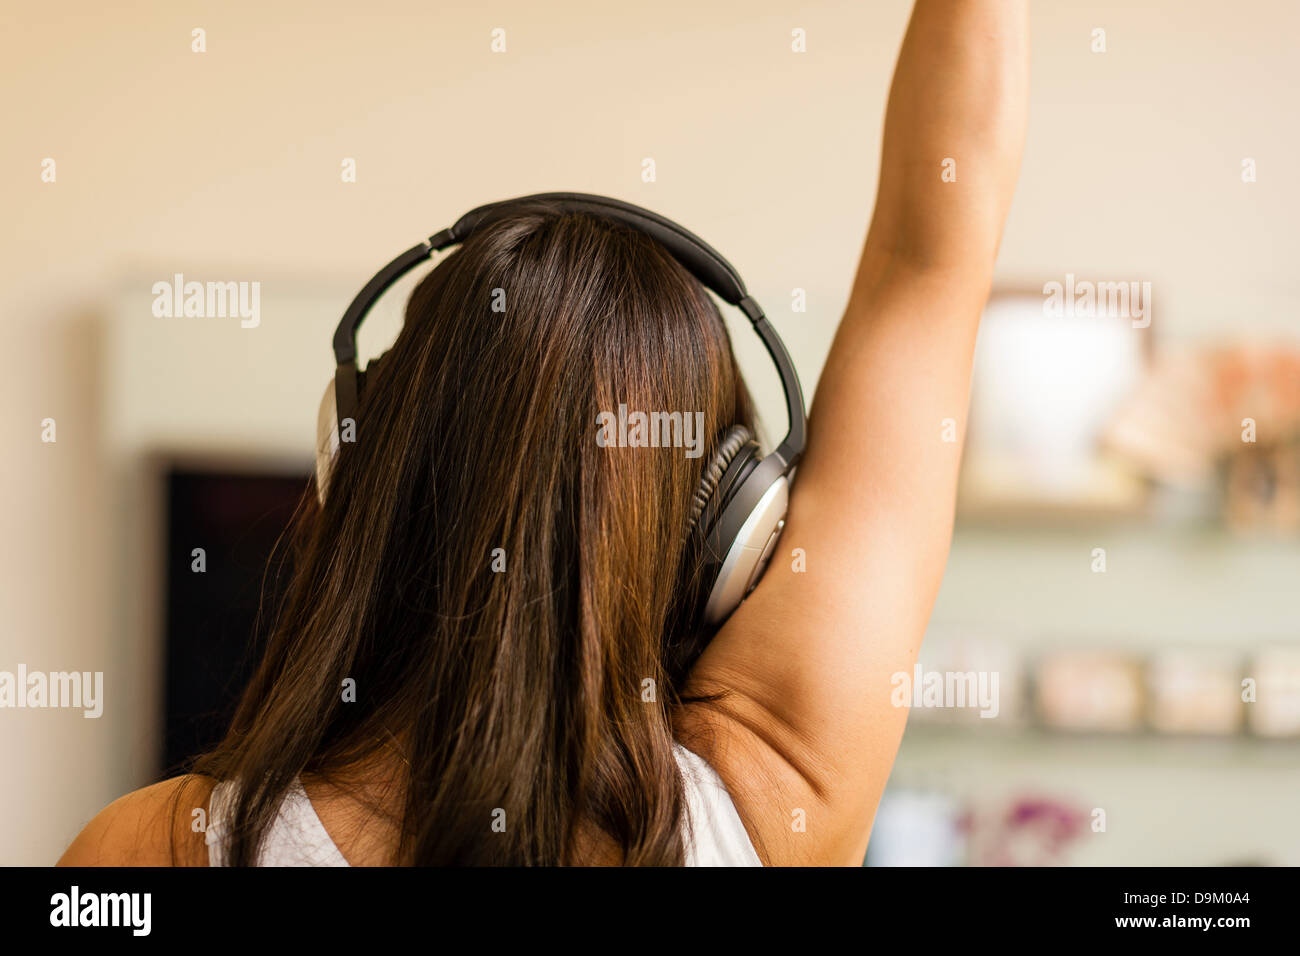 Mid adult woman wearing headphones and dancing, rear view Stock Photo